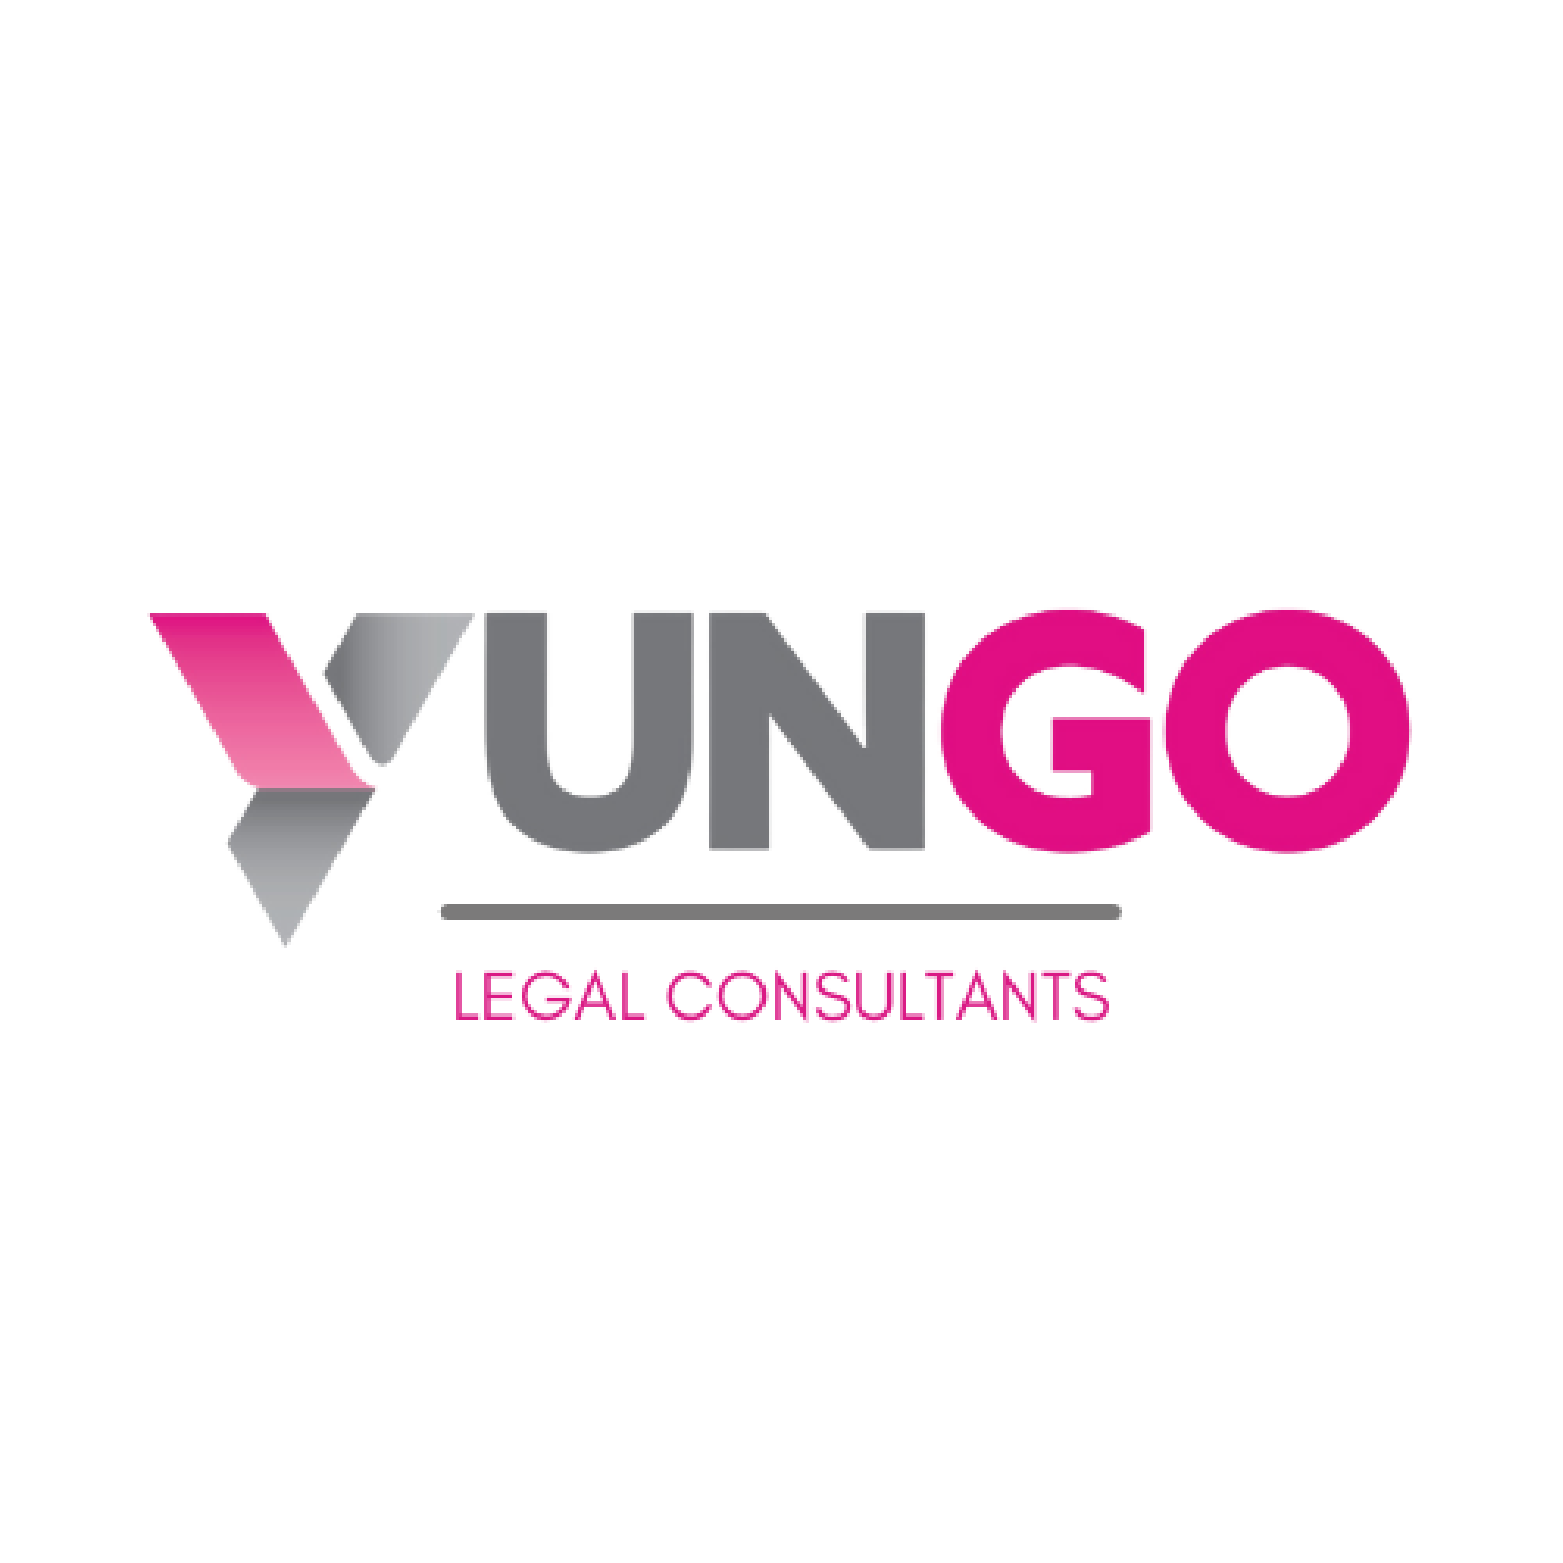 Yungo Legal Consultants participates as a sponsor at the LexisNexis Women in Law Awards